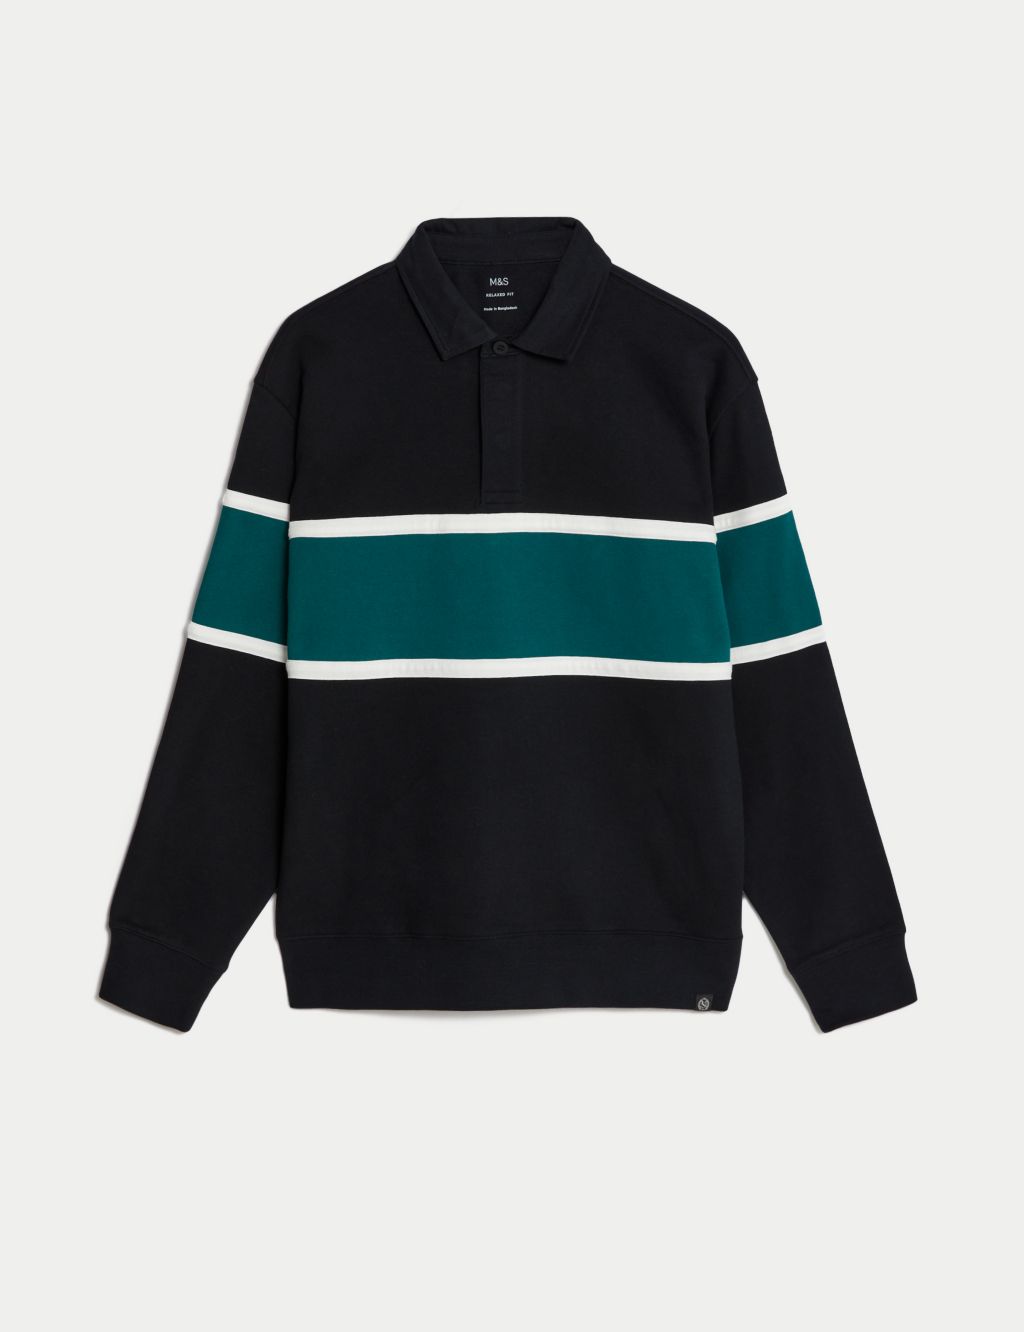 Relaxed Fit Pure Cotton Rugby Sweatshirt image 2